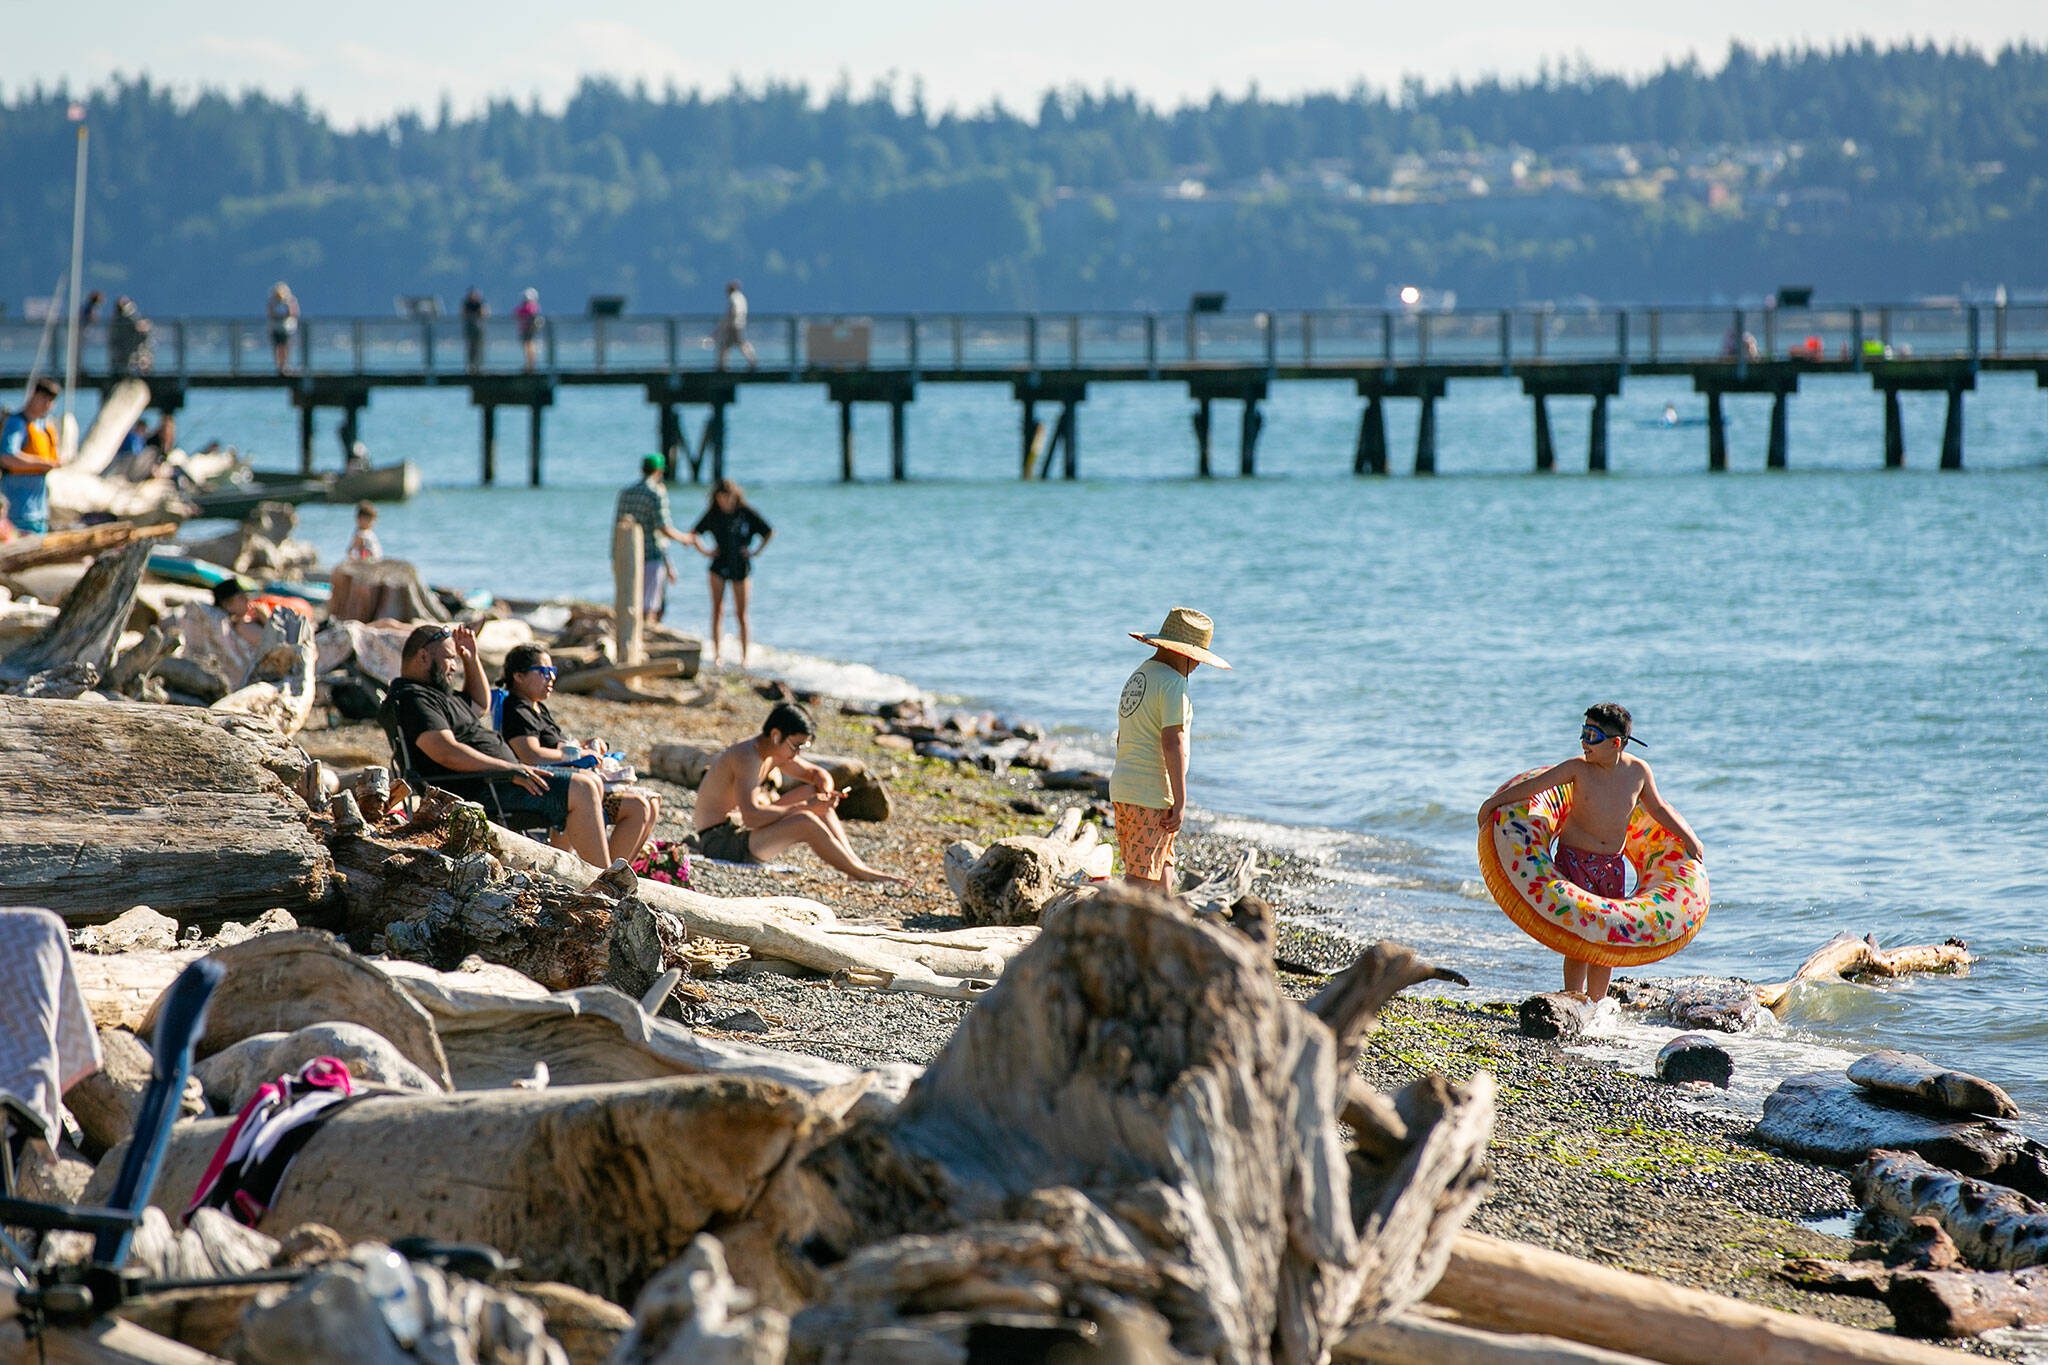 Weekend vacationers take to the beach on a warm and sunny afternoon at Kayak Point on July 1, 2023, in Stanwood, Washington. Daily highs in Snohomish County are expected to spike into the 80s during the middle of the week, according to data from the National Weather Service. (Ryan Berry / The Herald)